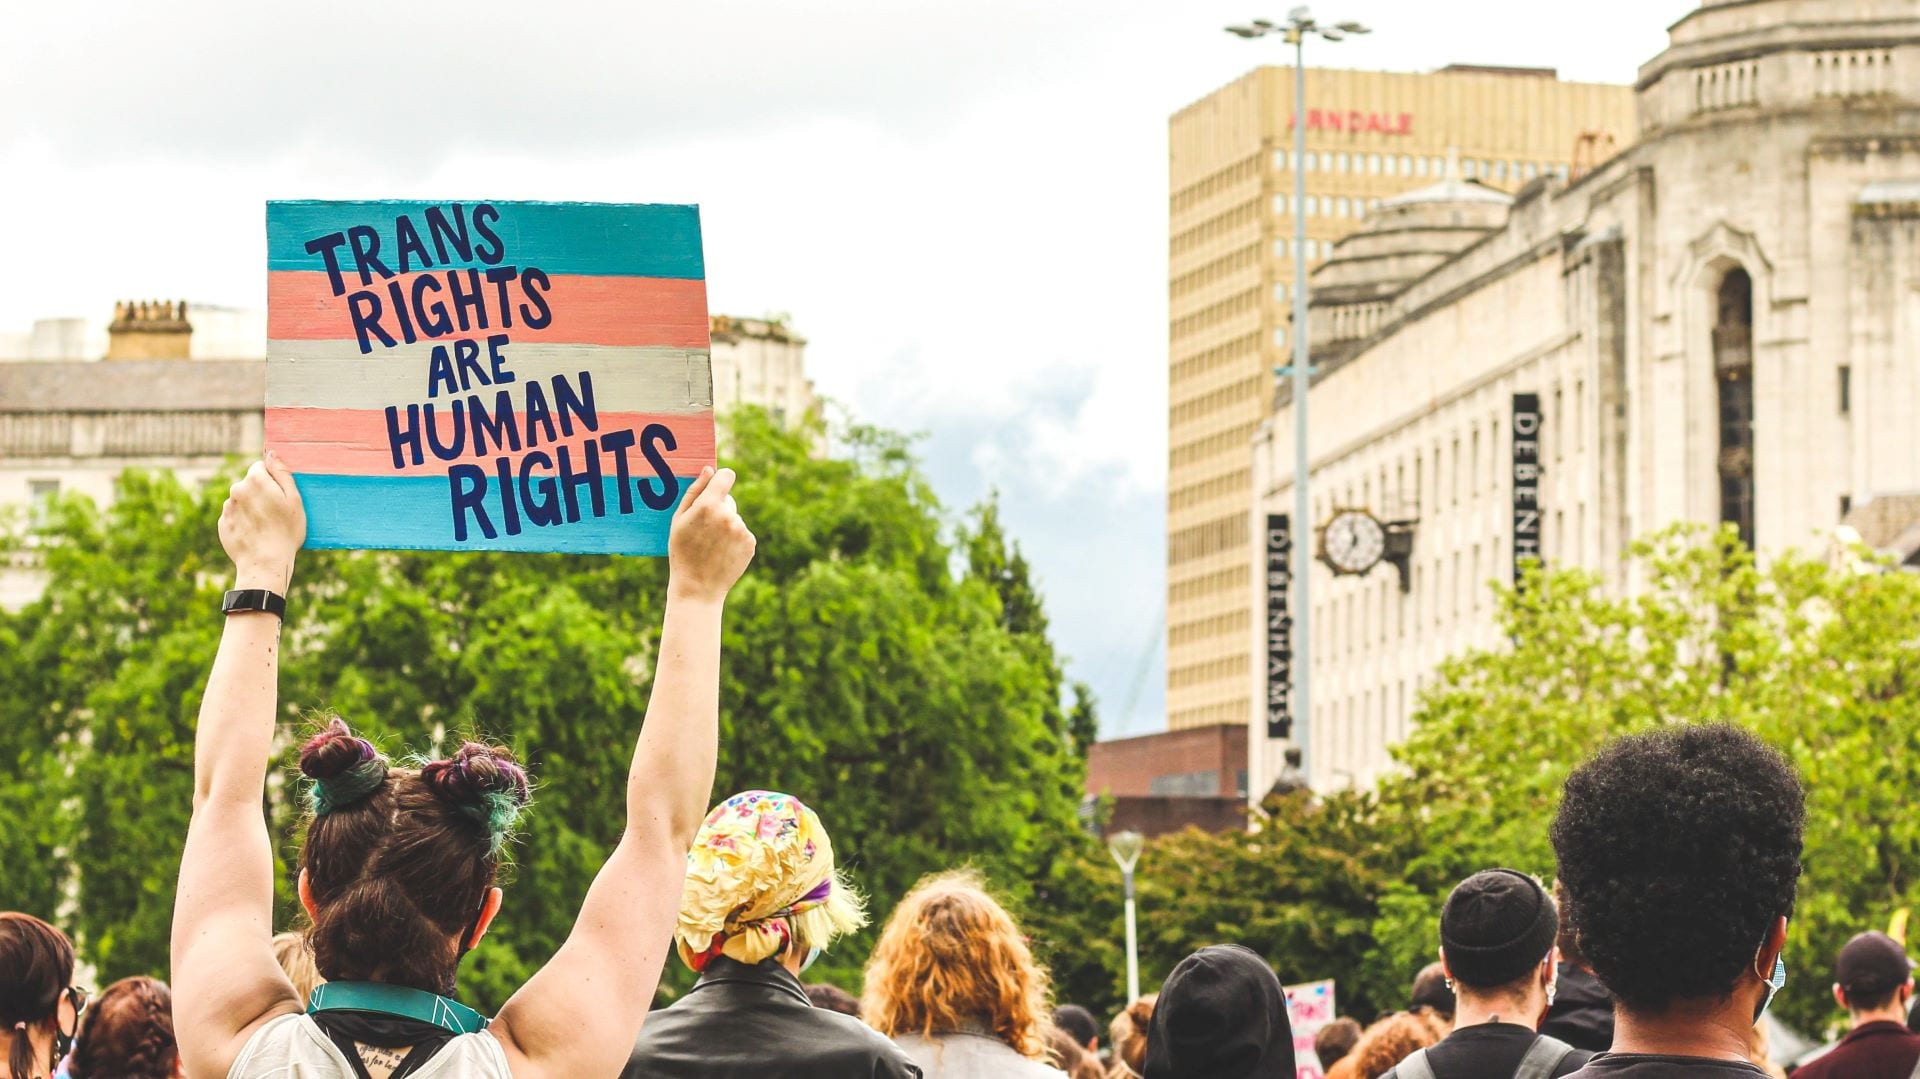 Governments have a long history of discriminating against transgender people. In a number of ways, transgender people do not receive equal treatment, either culturally or legally. We all need to make this our fight.